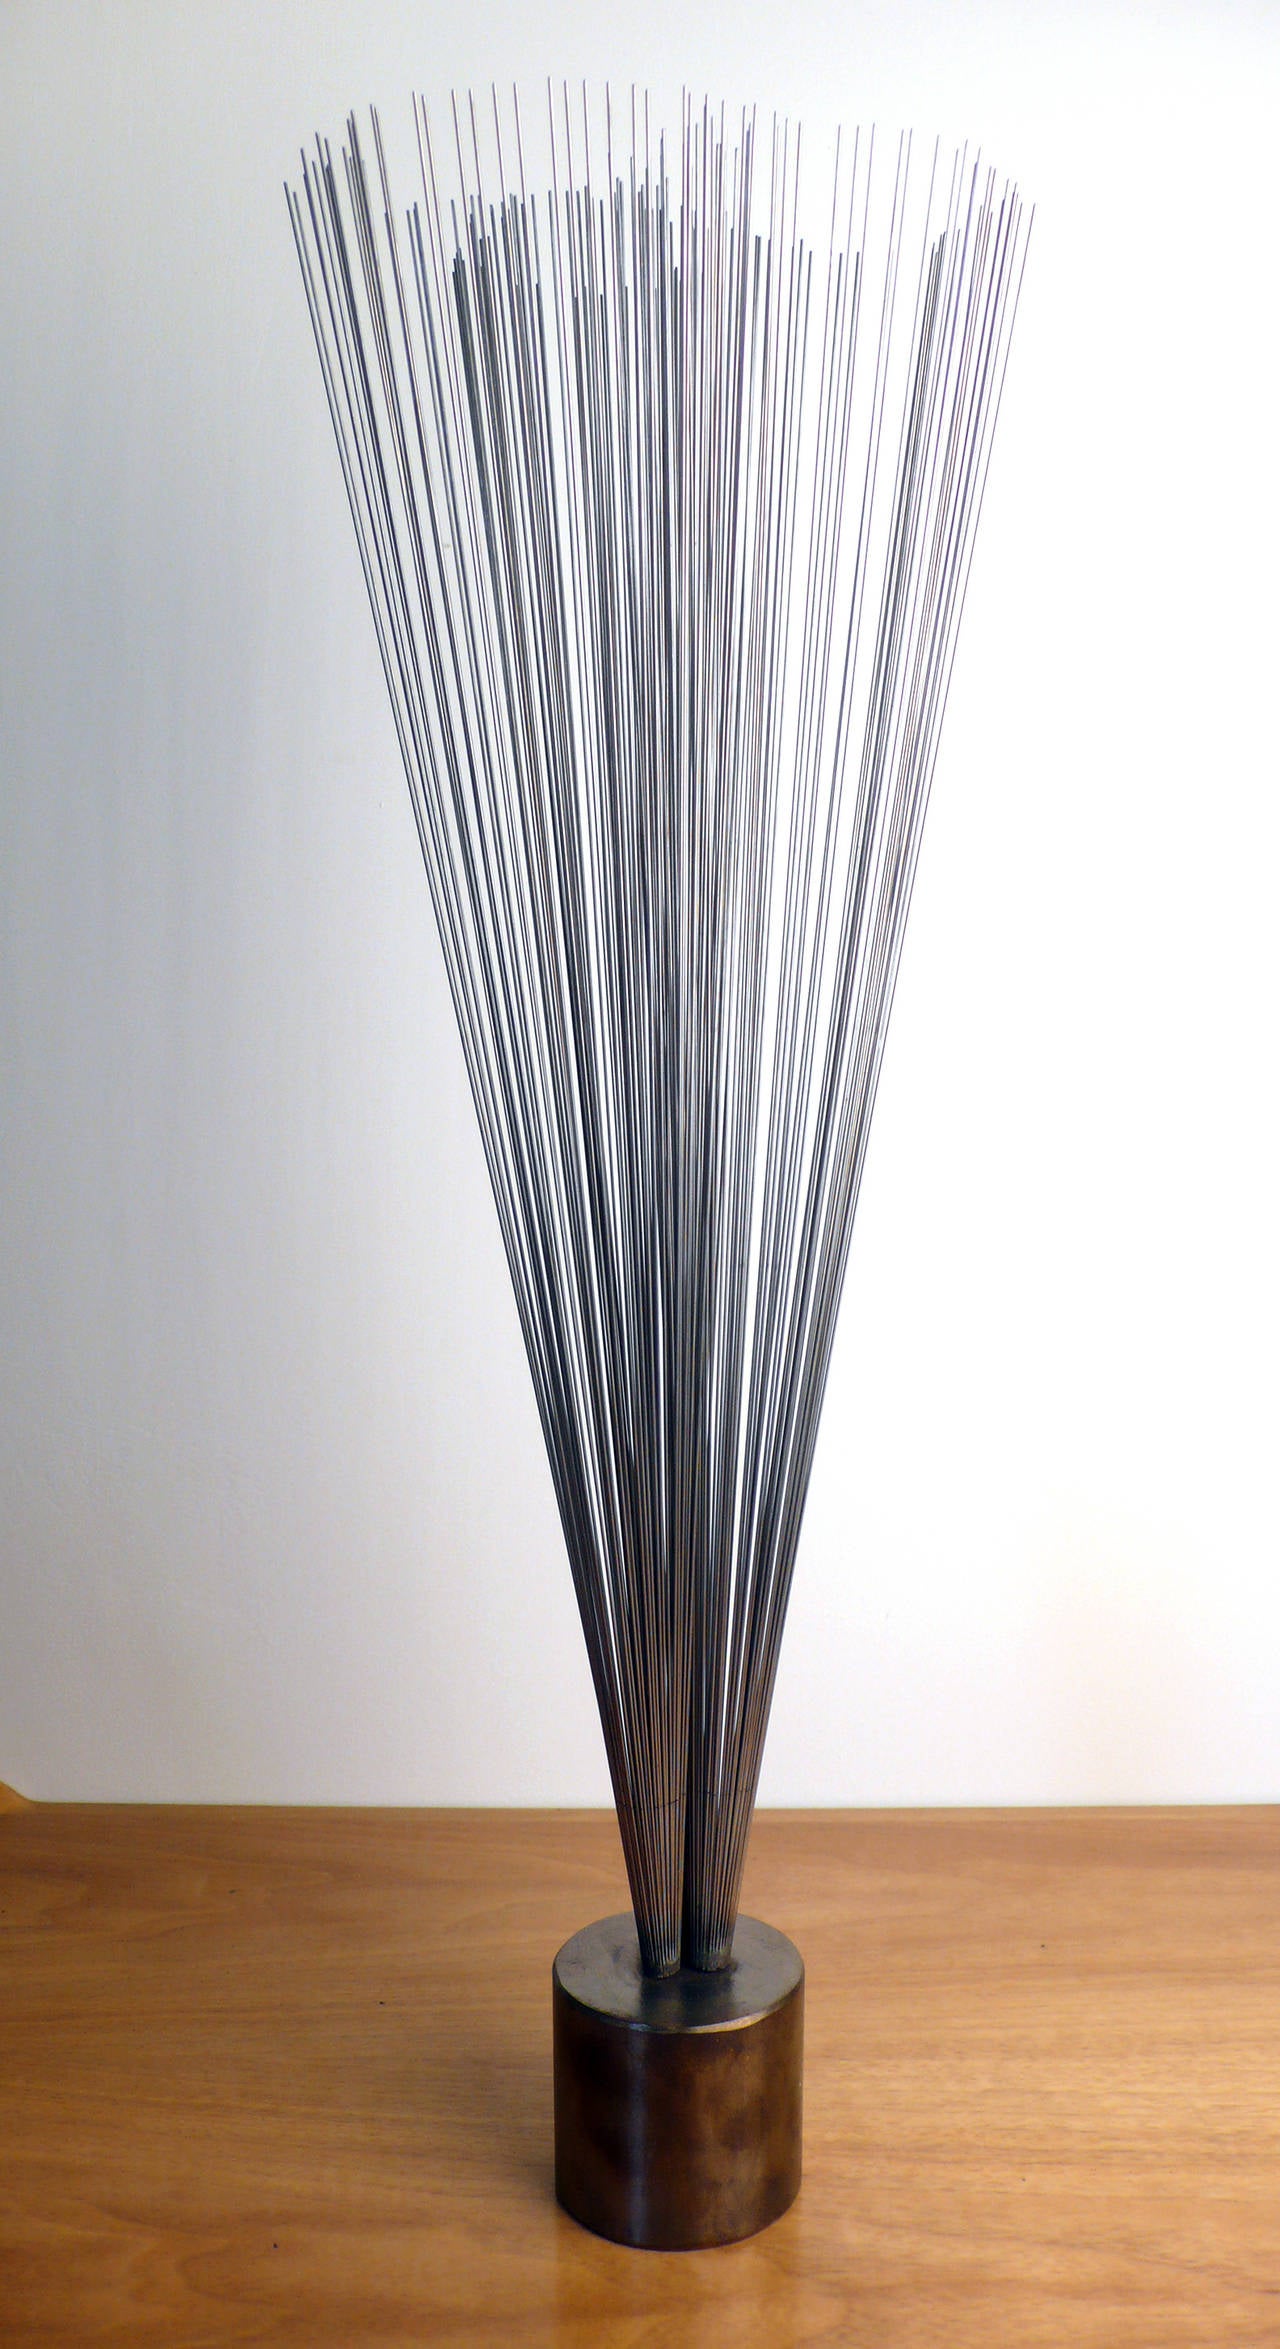 Early Harry Bertoia Spray in Bronze Base. Three conical branches of stainless wires mounted to a bronze cylindrical base.
Sold with a title of authentication from Bertoia Studio.